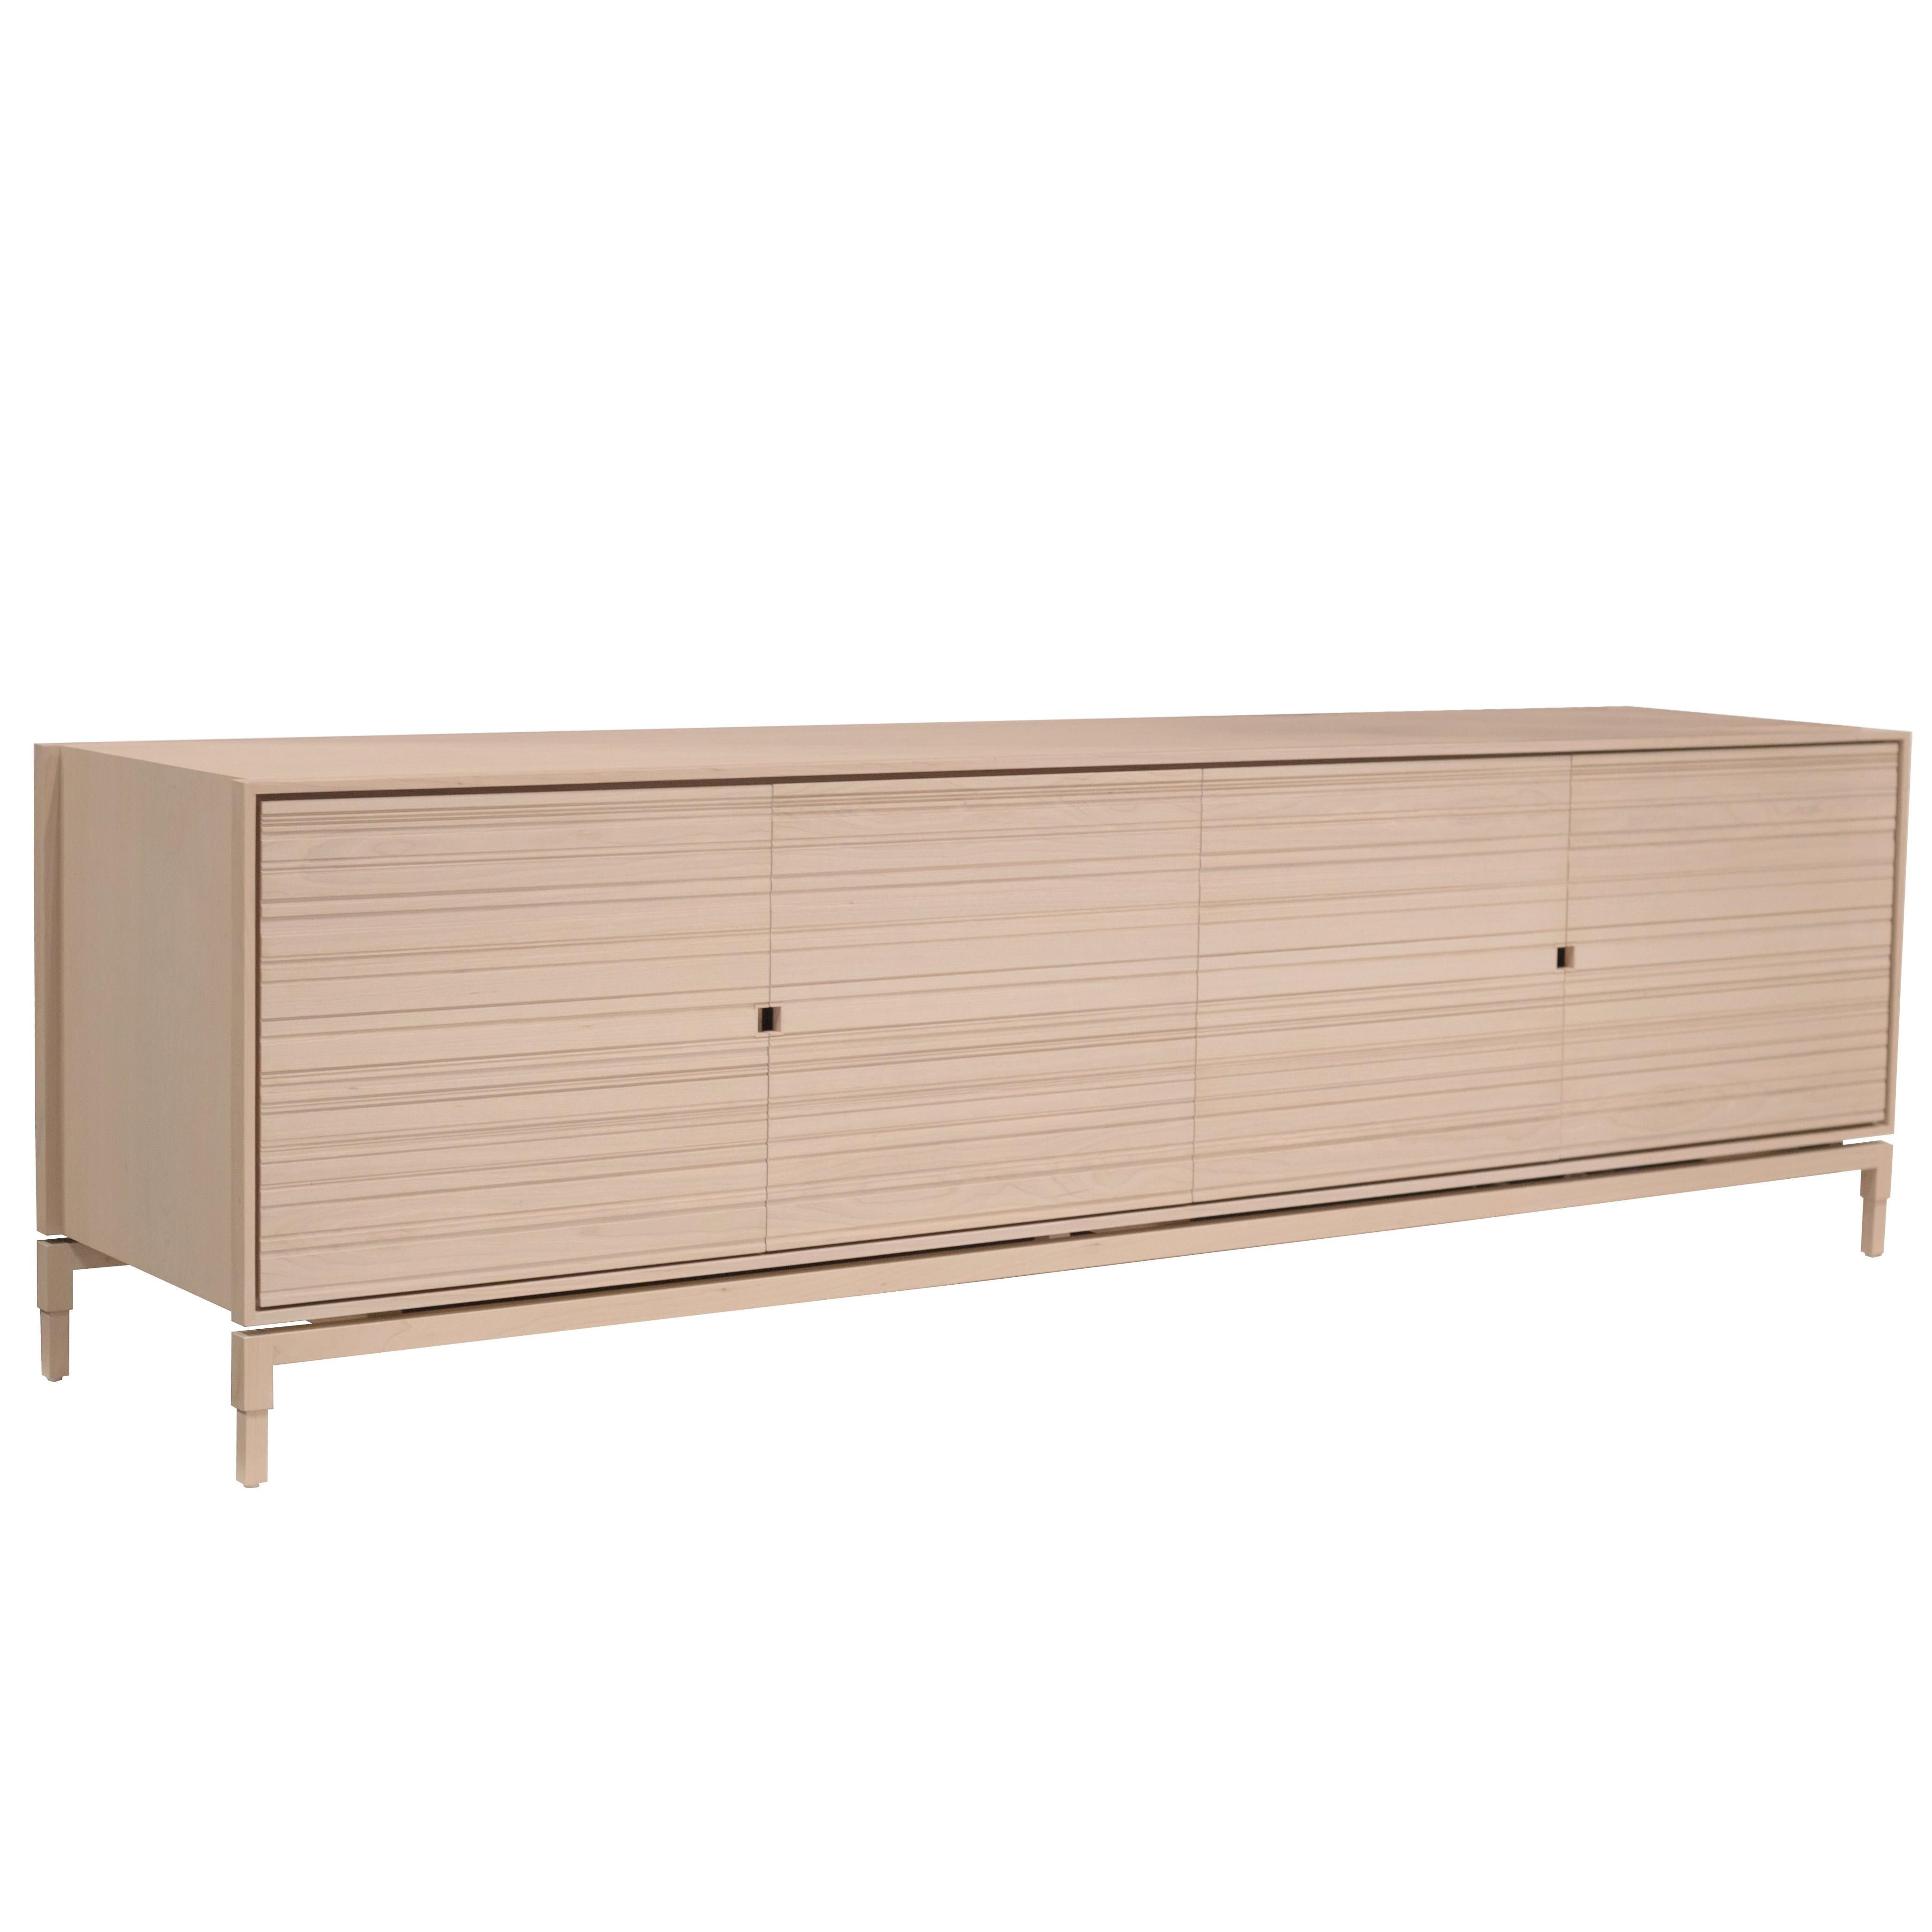 Chicago Credenza in Blush by May Furniture